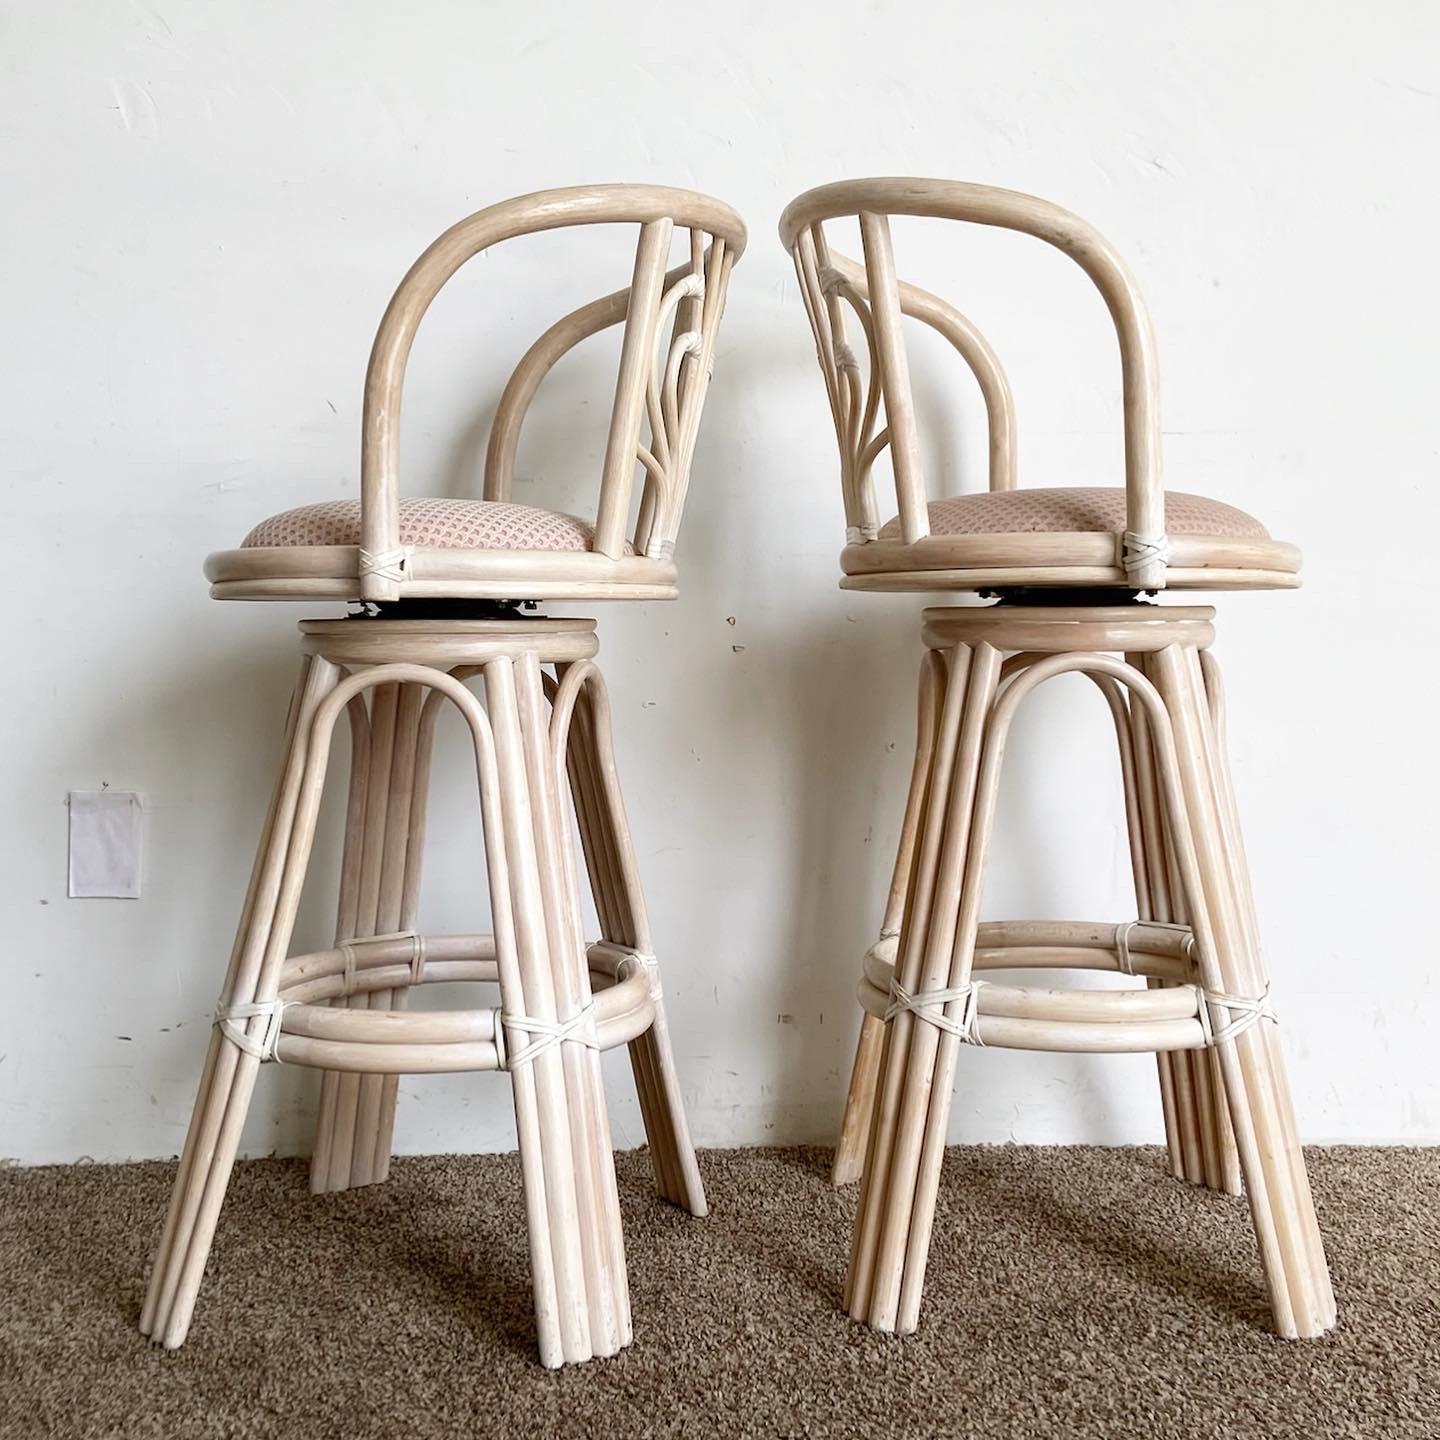 Experience the allure of boho chic with this remarkable set of 4 vintage bamboo rattan swivel counter stools. Each stool boasts a delightful washed pickled pink finish, perfectly complemented by sculpted backrests. Elevate your space with style and